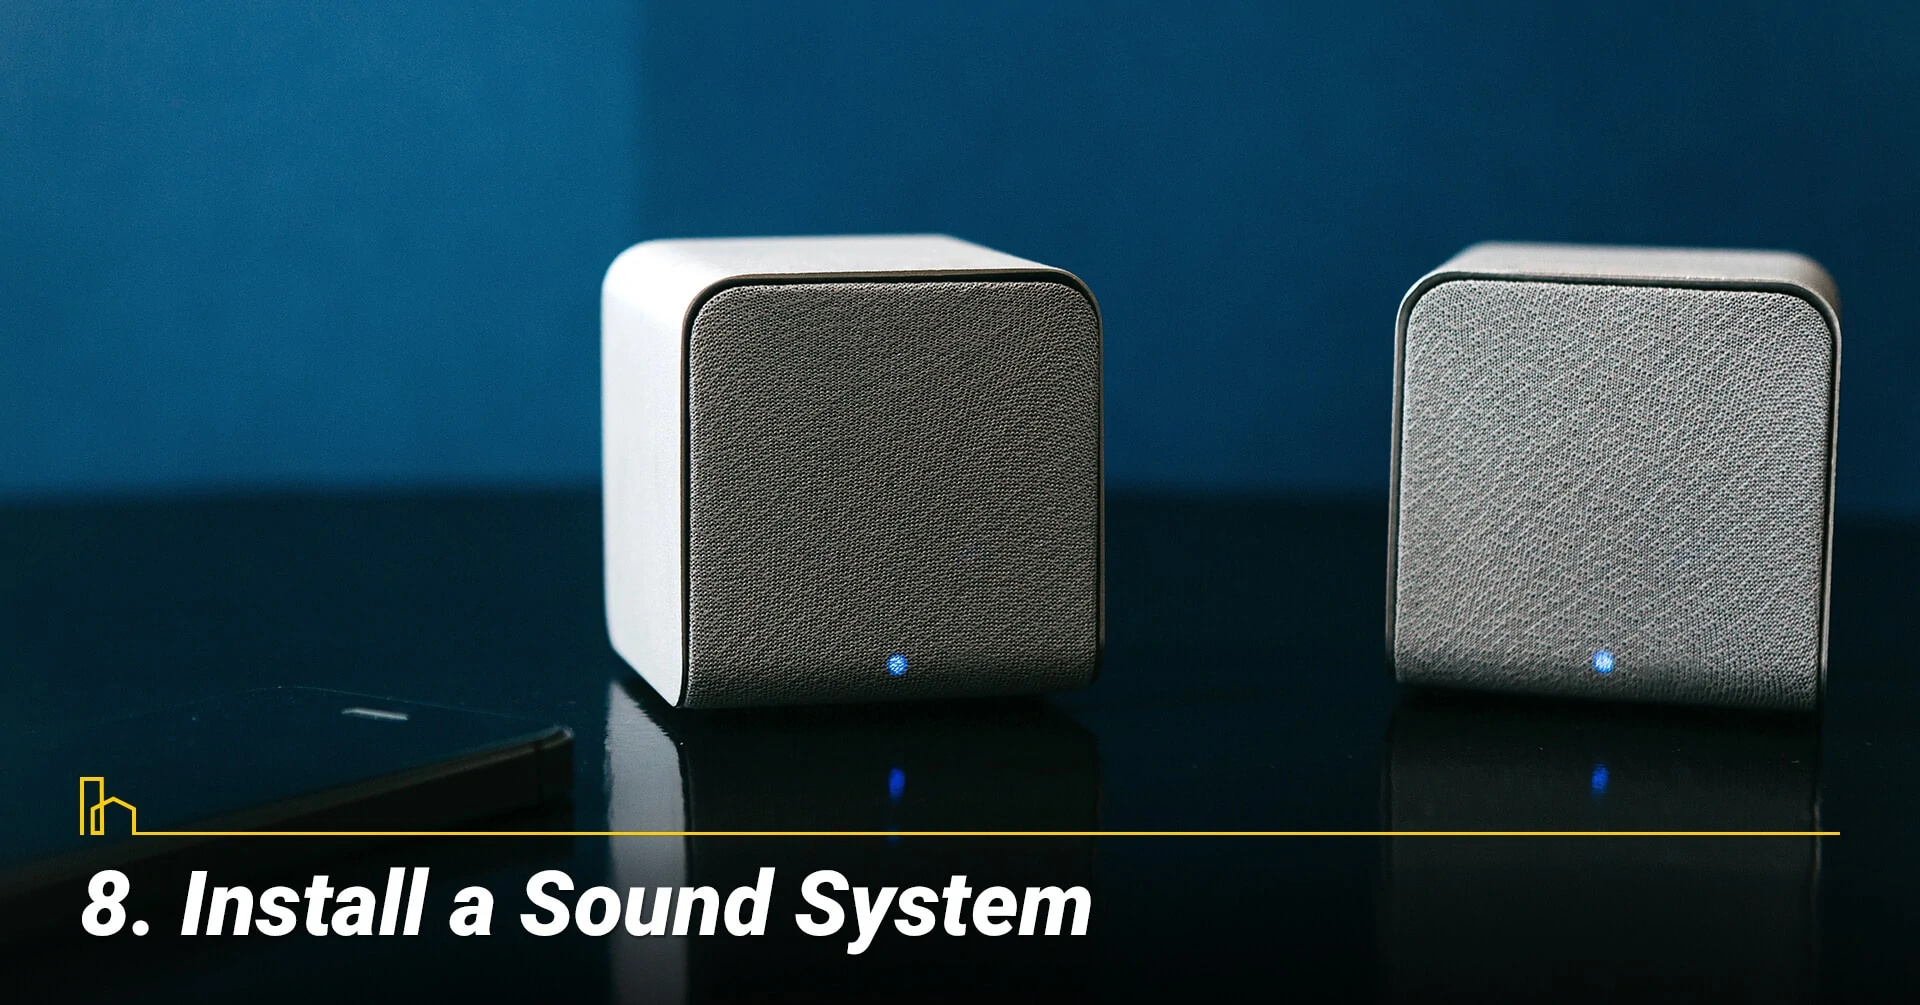 Install a Sound System, listen to music to relax